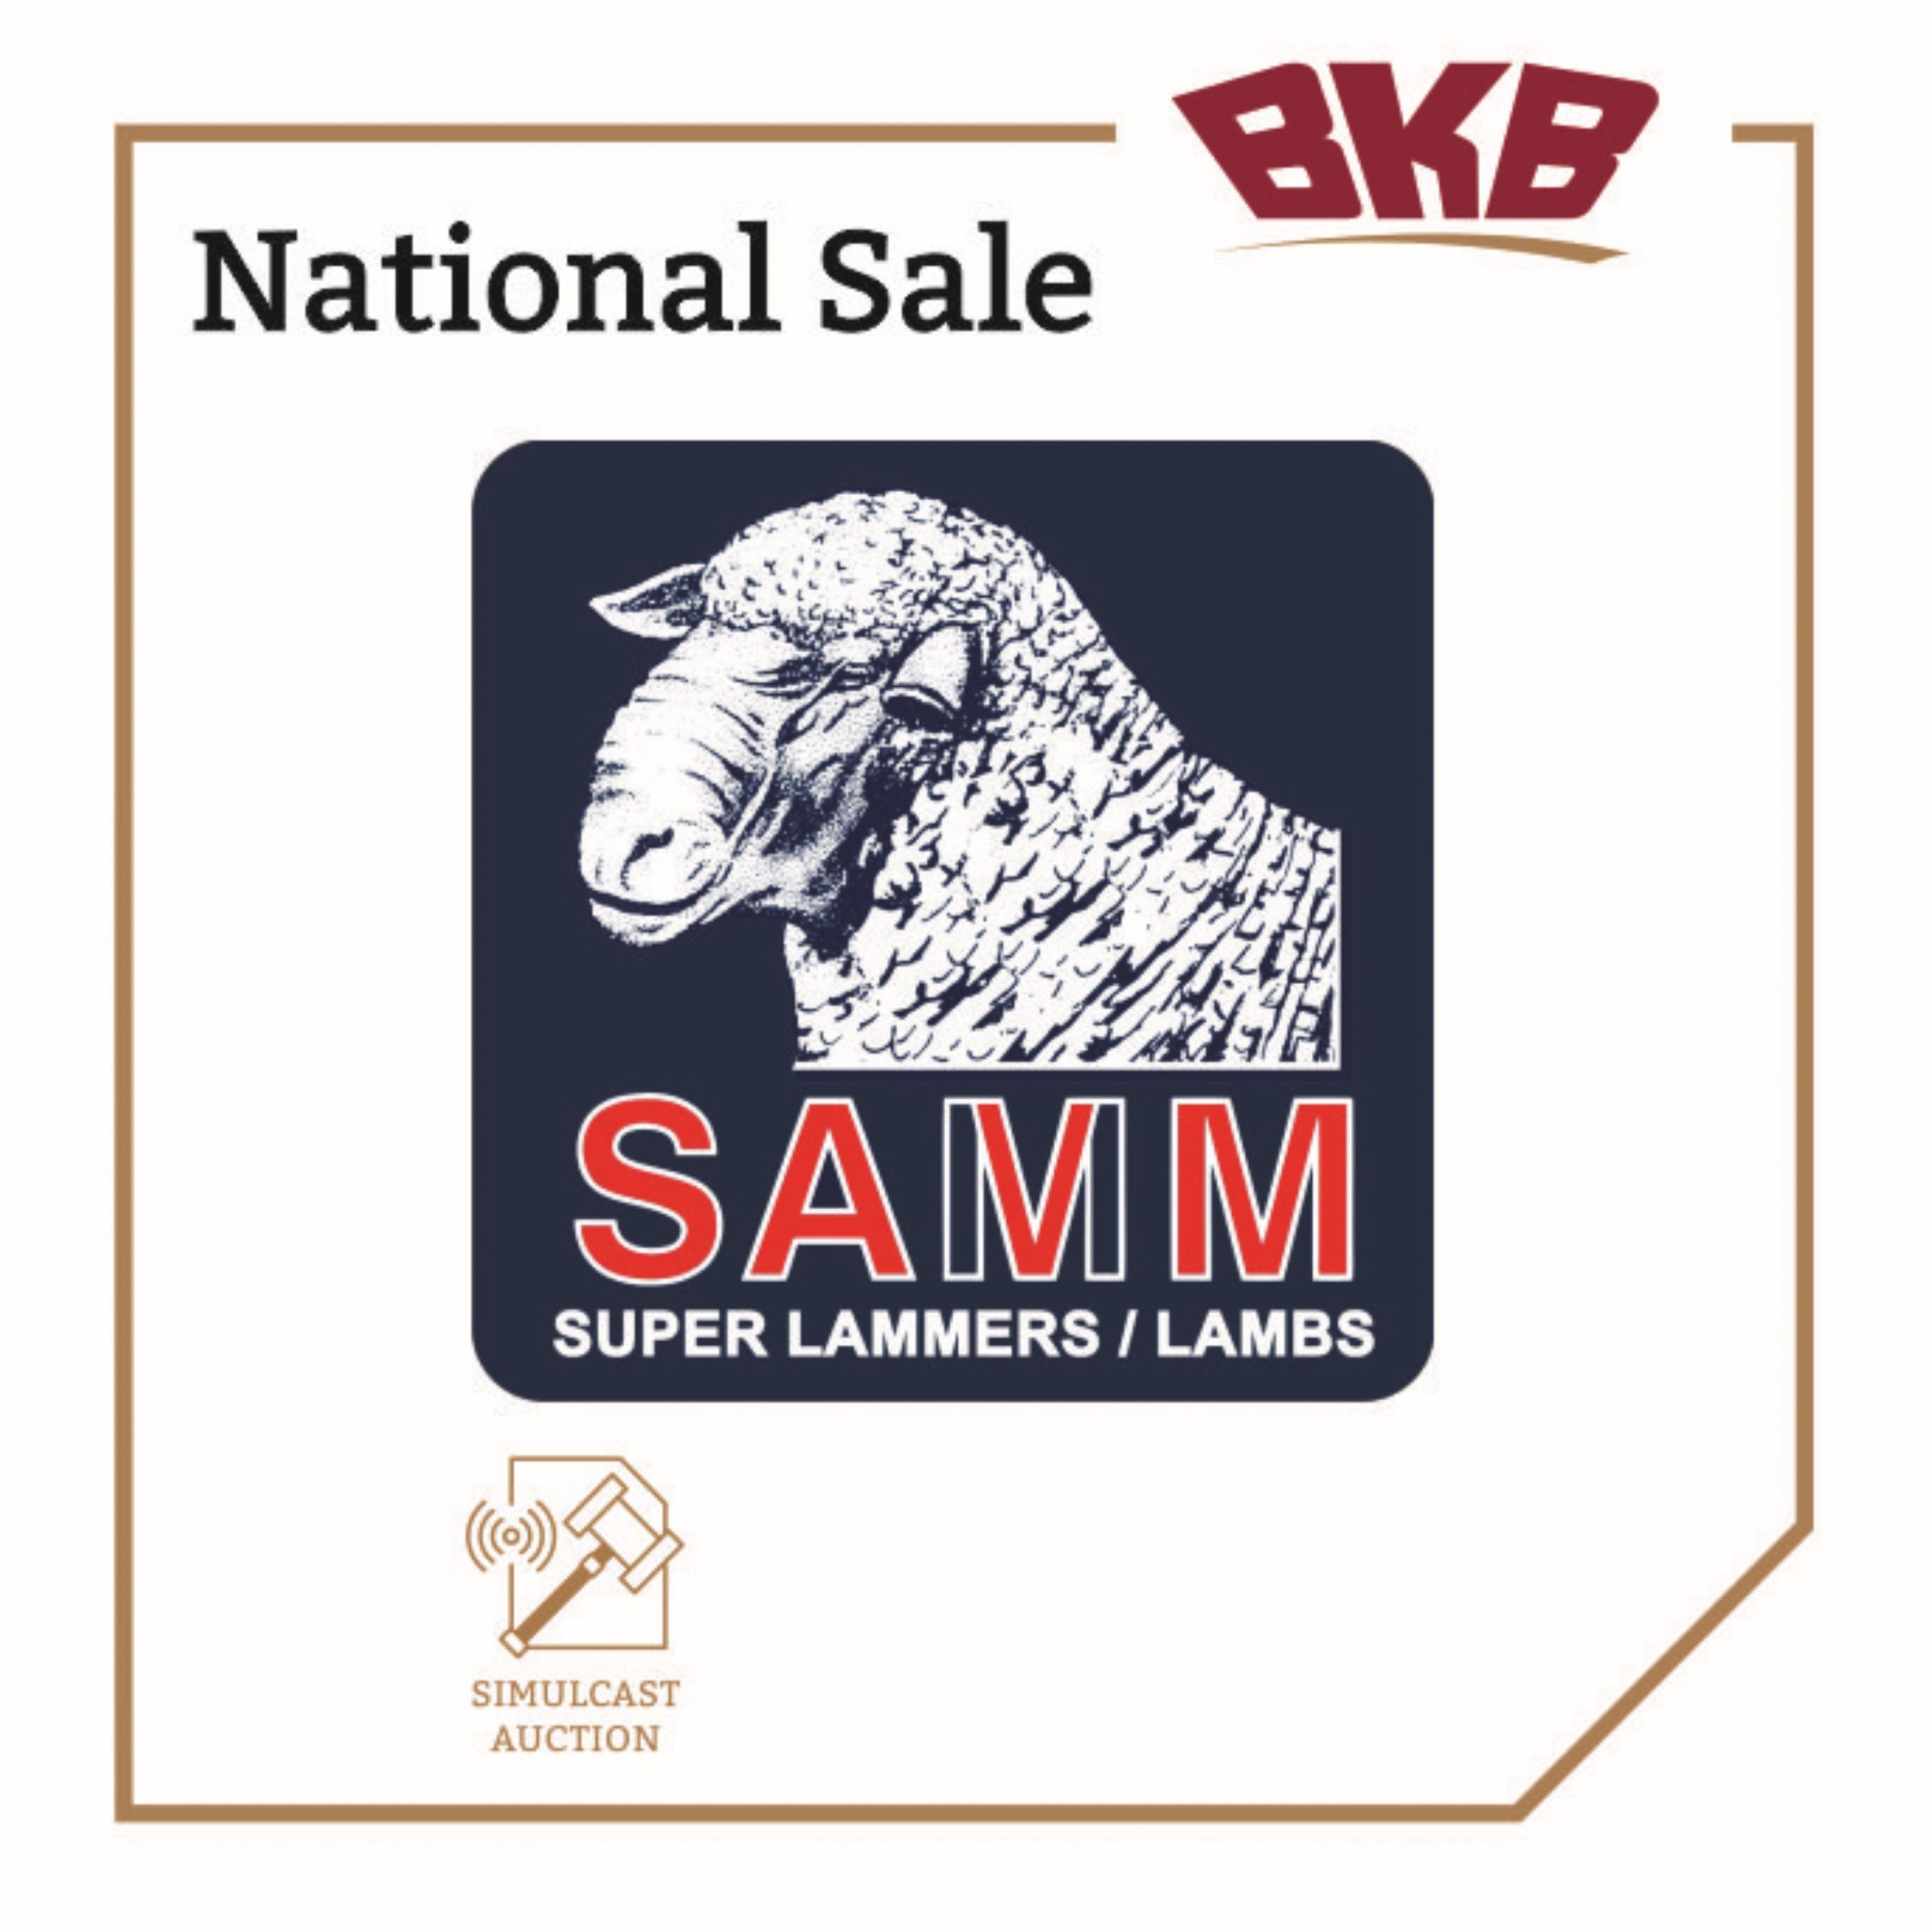 66th National Samm Auction| BKB Events - For all agricultural events and auctions